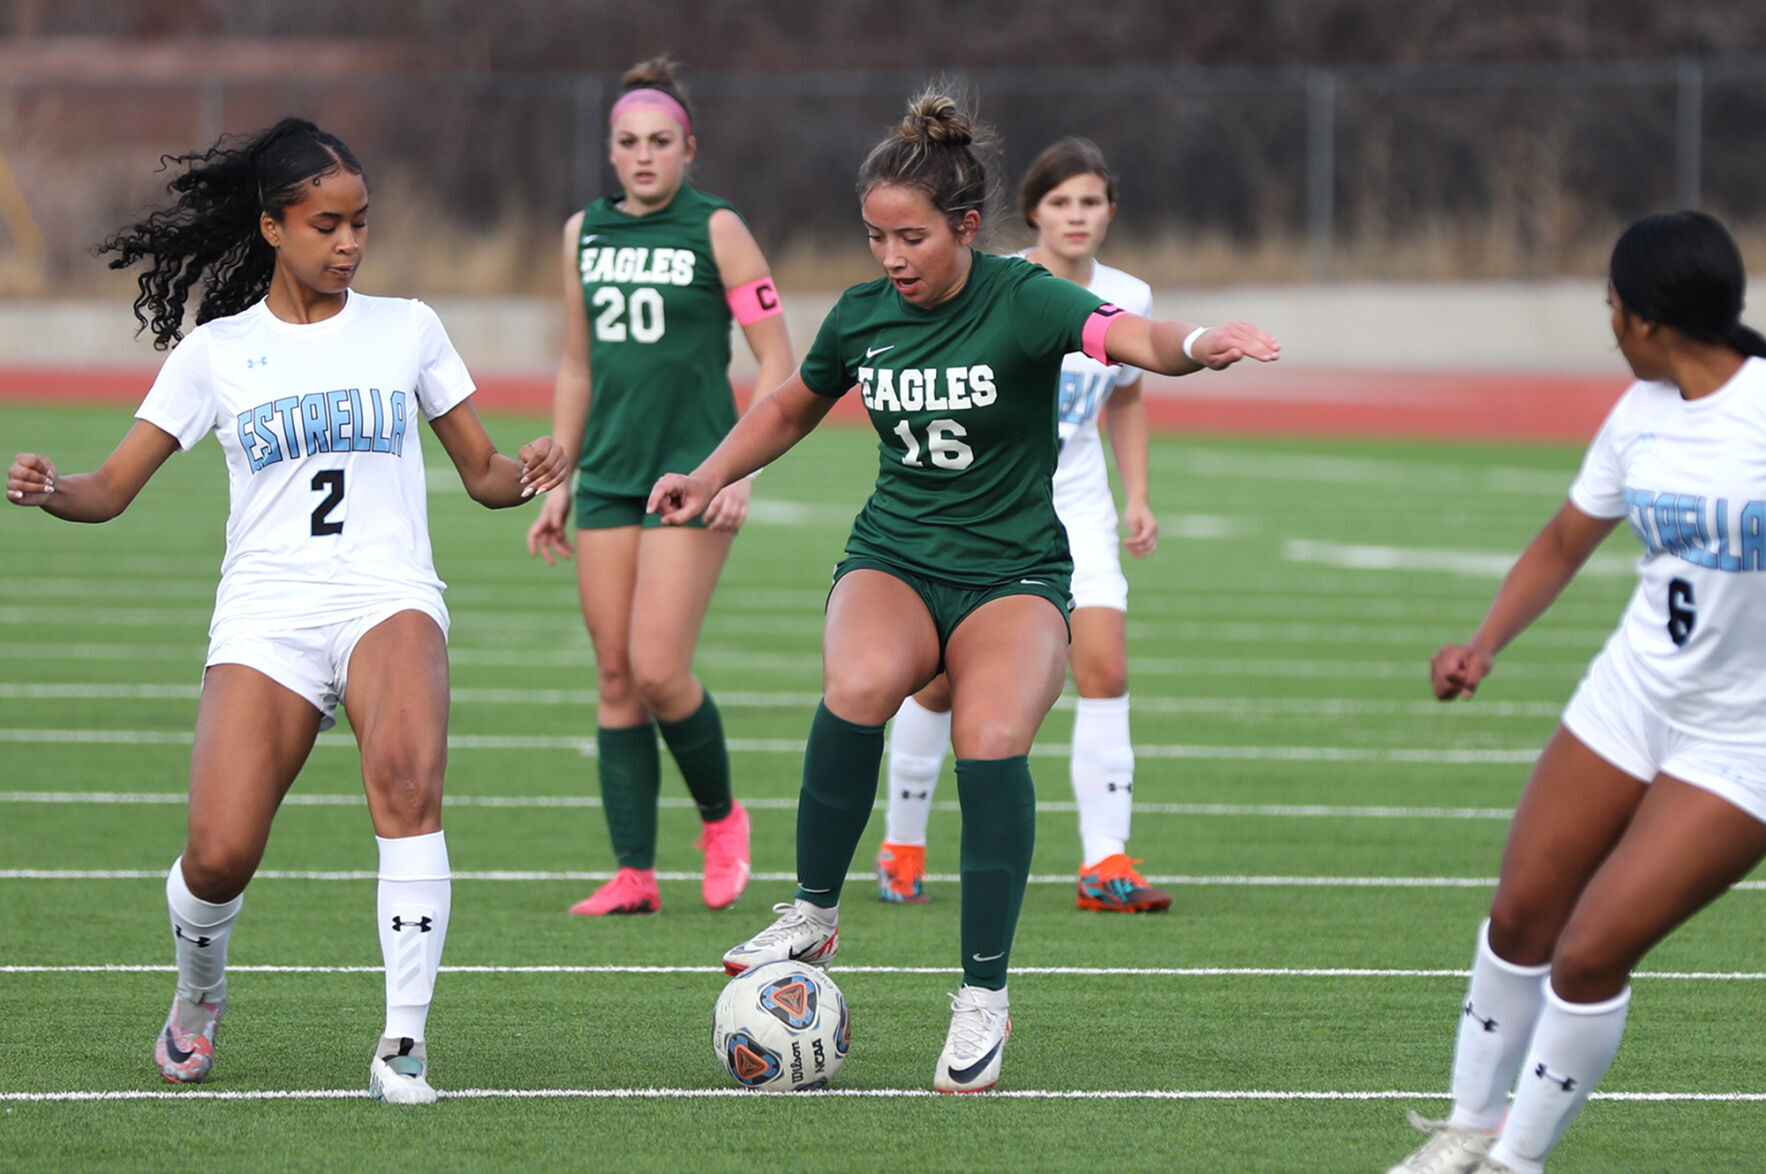 LOCAL ROUNDUP: Eagles girls soccer wins 3rd straight to start season